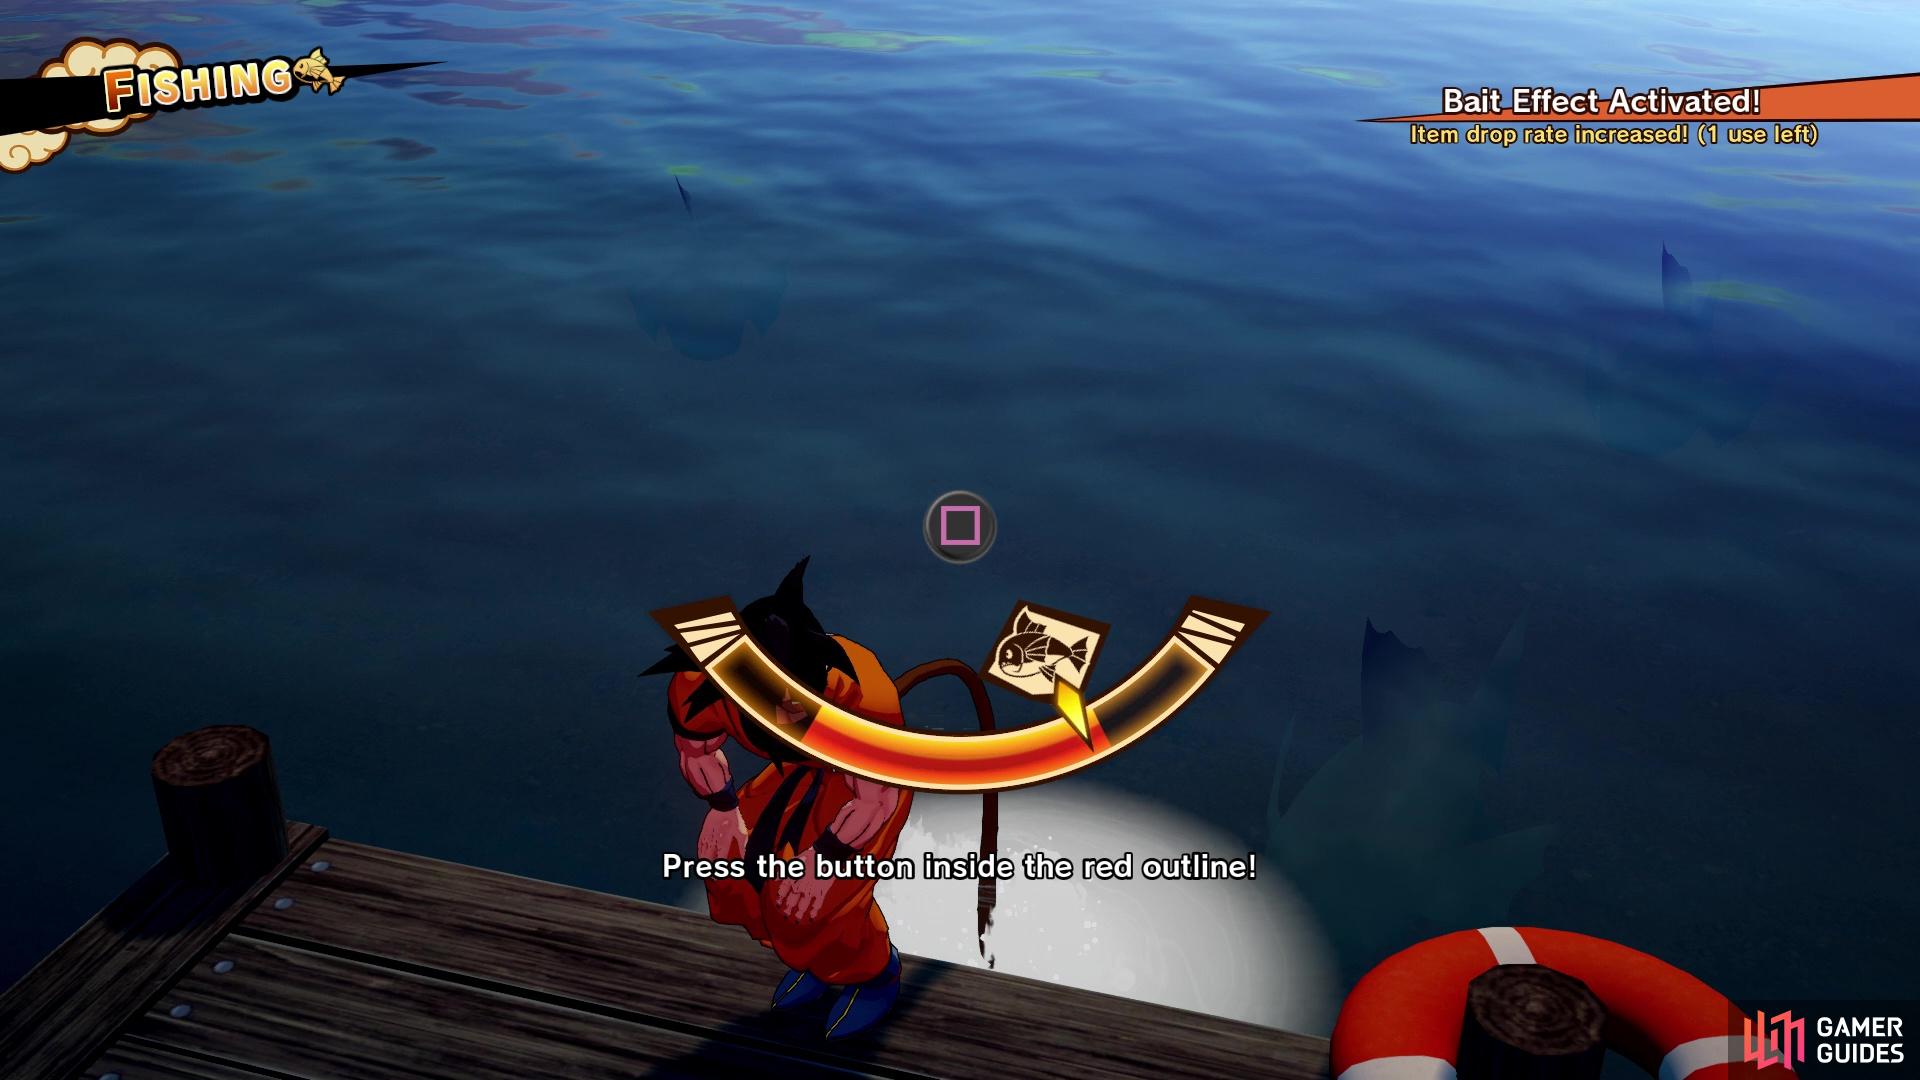 Stop the cursor in the highlighted area to make it easier to catch the fish